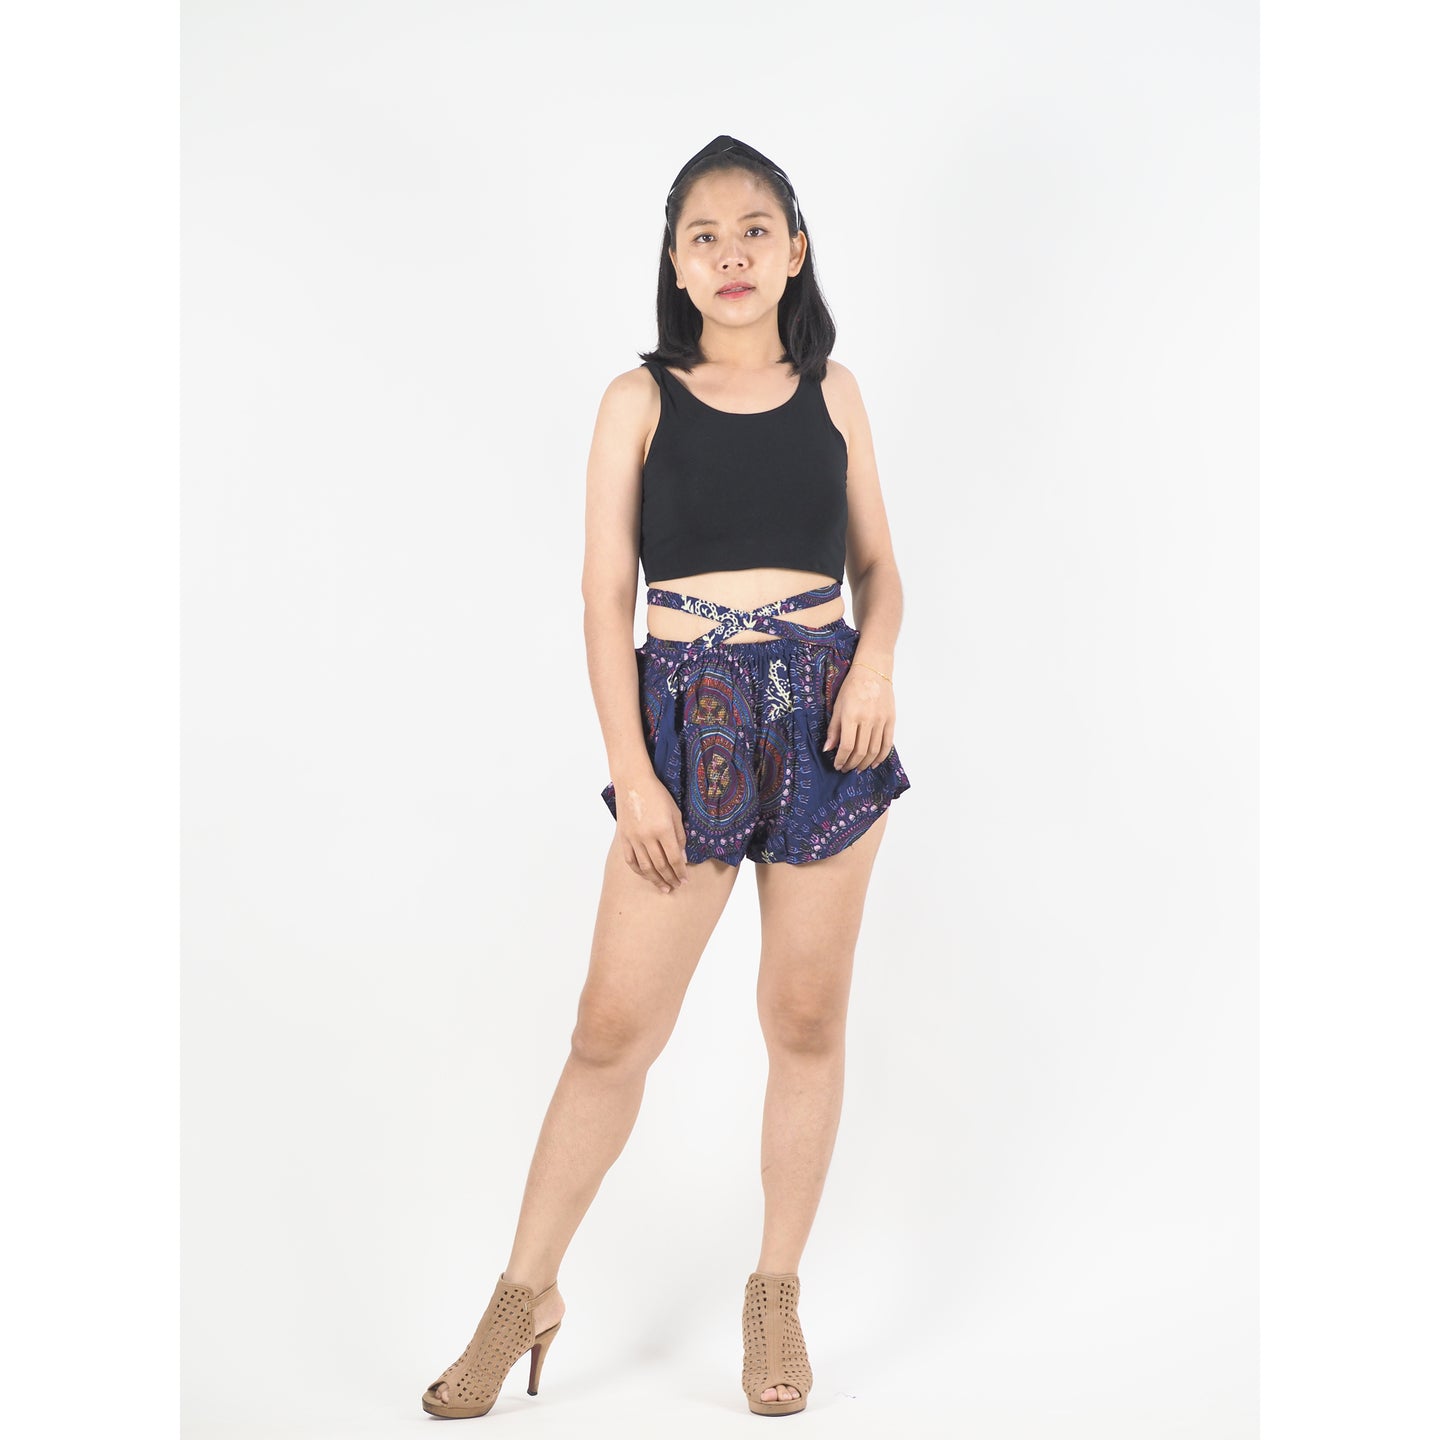 Sunflower Women's Blooming Shorts Pants in Navy Blue PP0206 020152 03